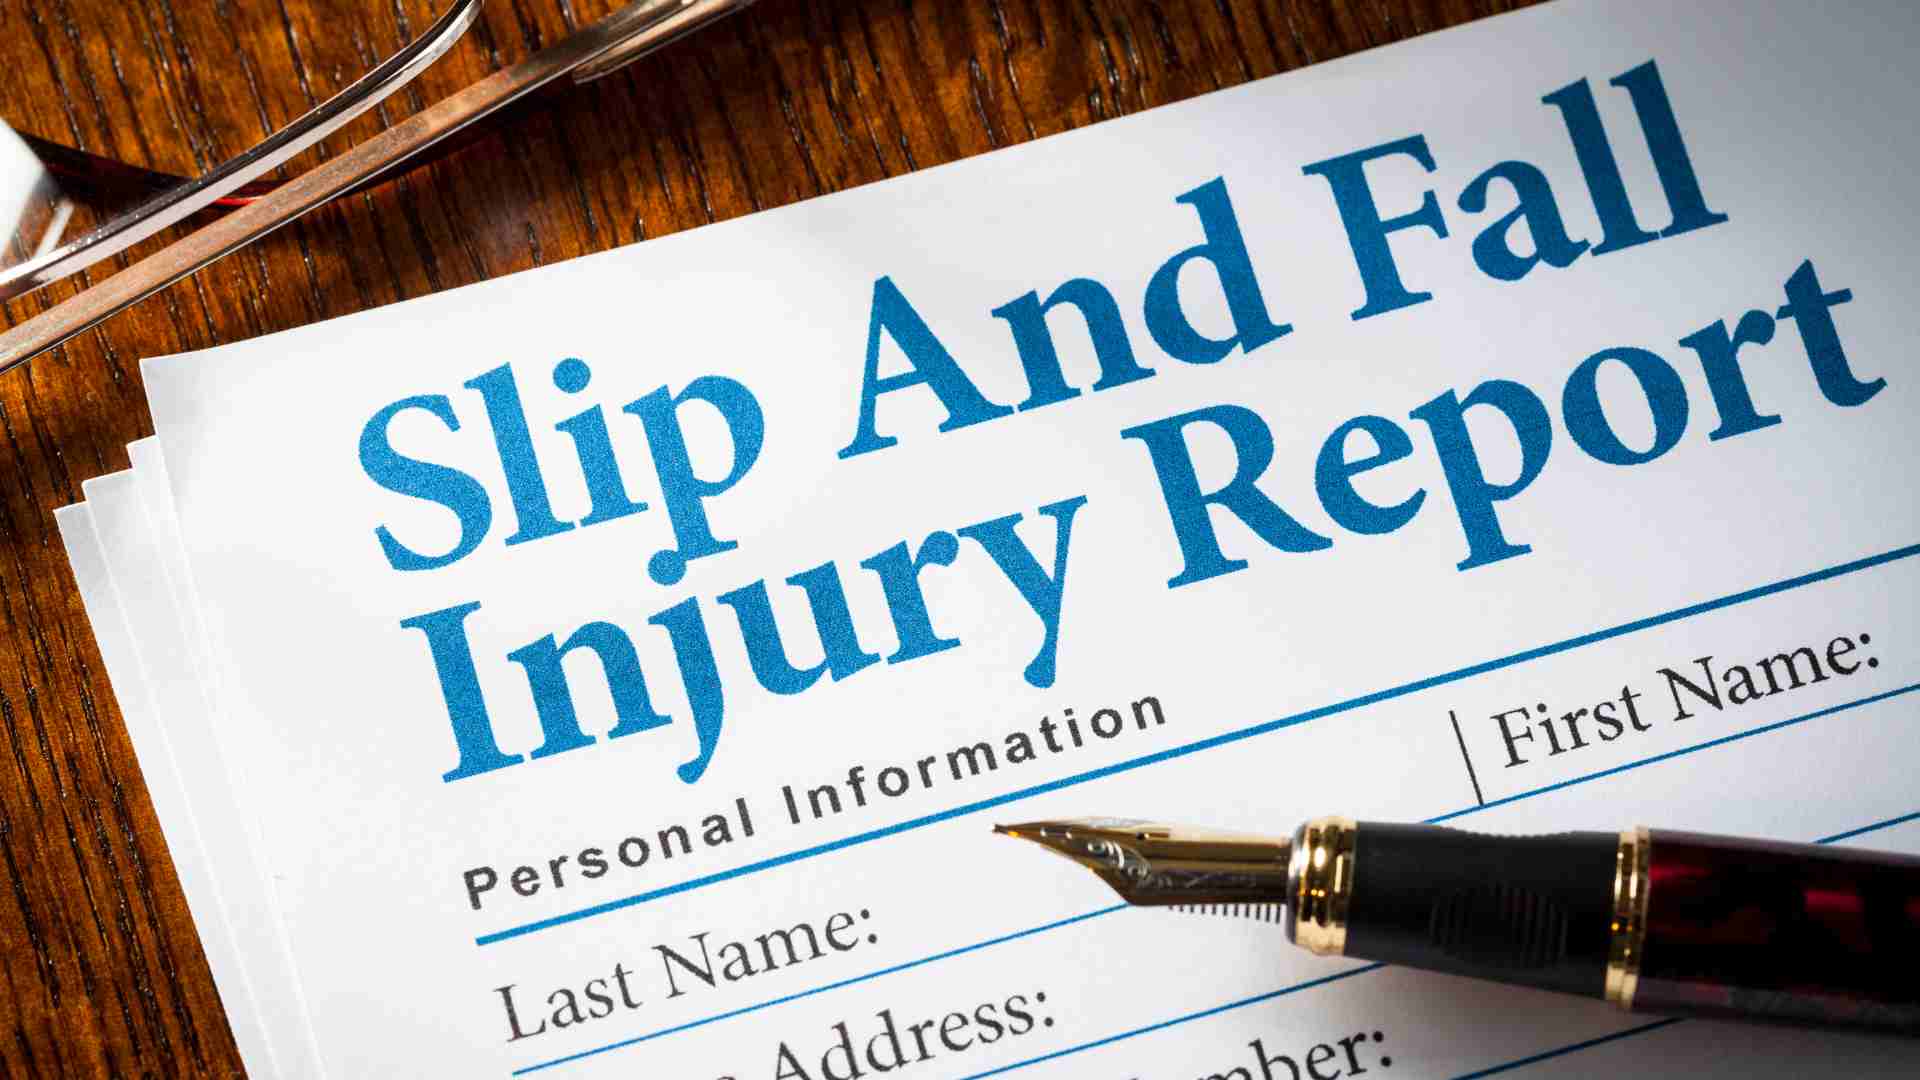 6 of the Most Common Slip and Fall Injuries Post Image